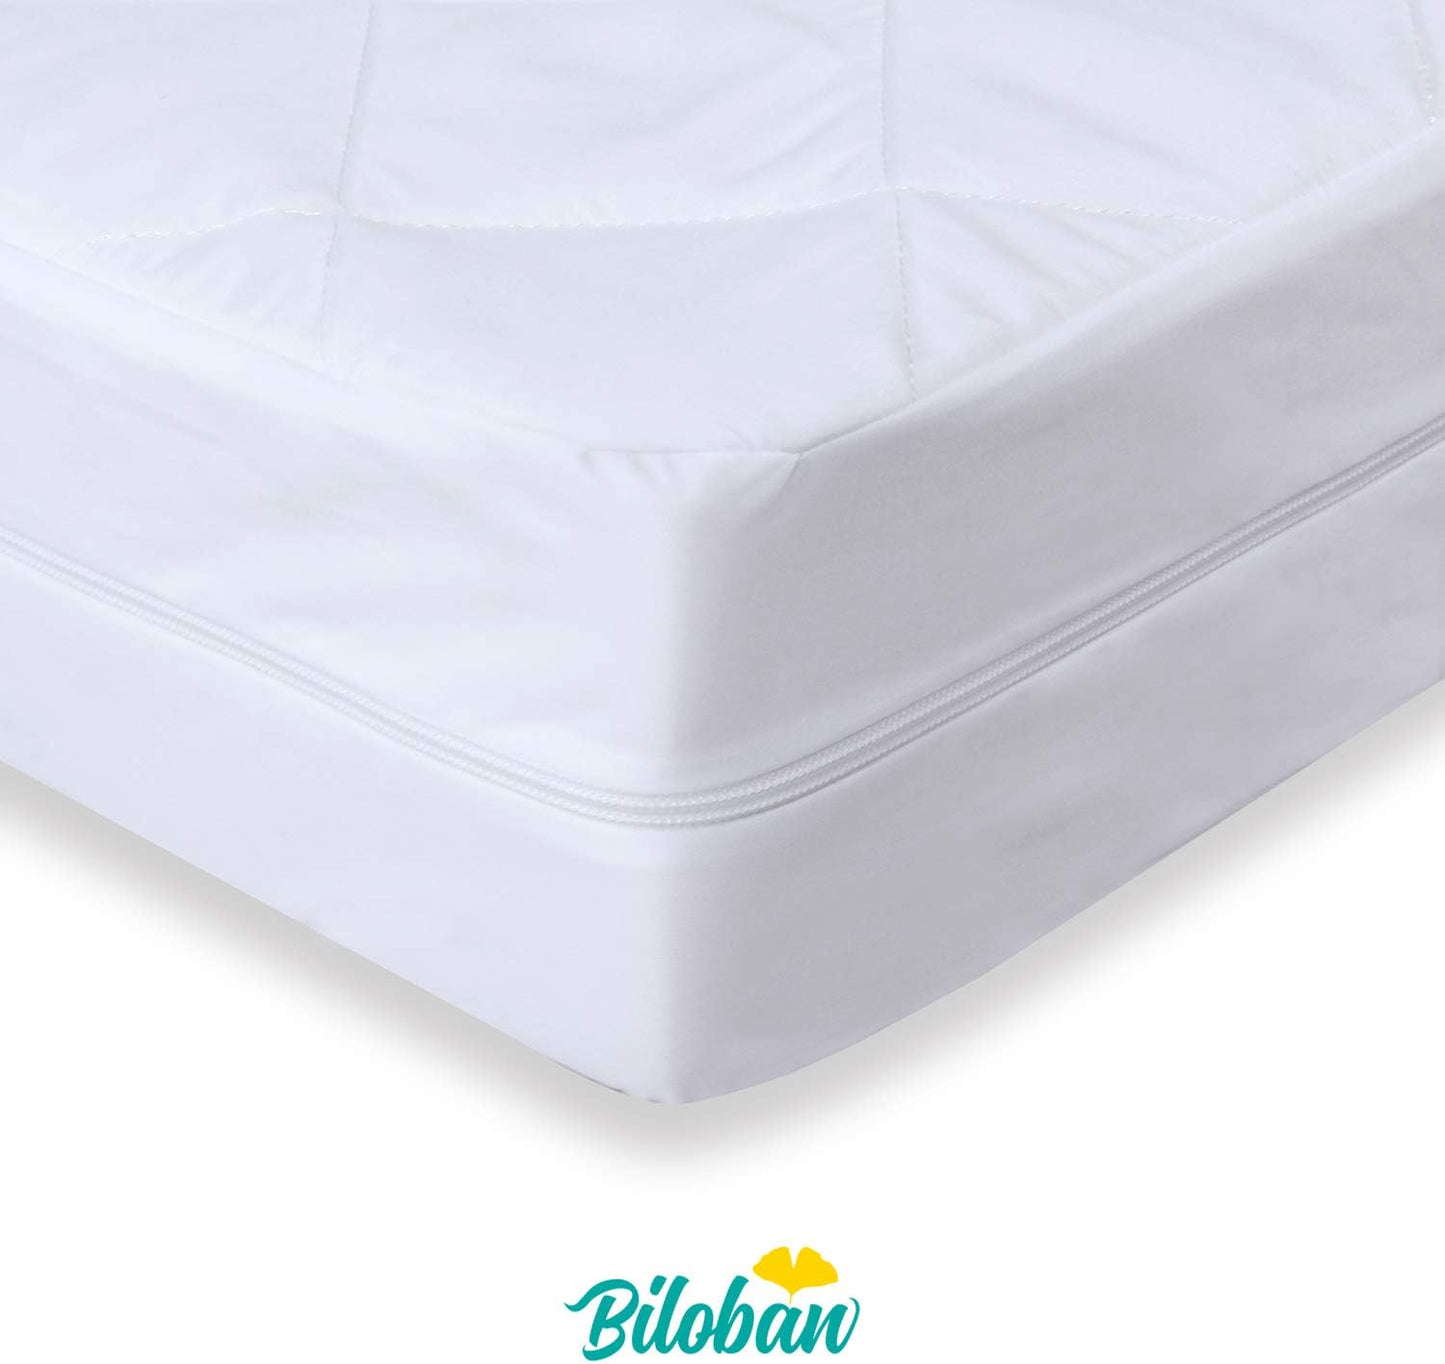 Zippered Crib Mattress Protector - Waterproof Crib Mattress Encasement, Breathable and Absorbent, 6 Sides Fully Encased Crib Mattress Cover.